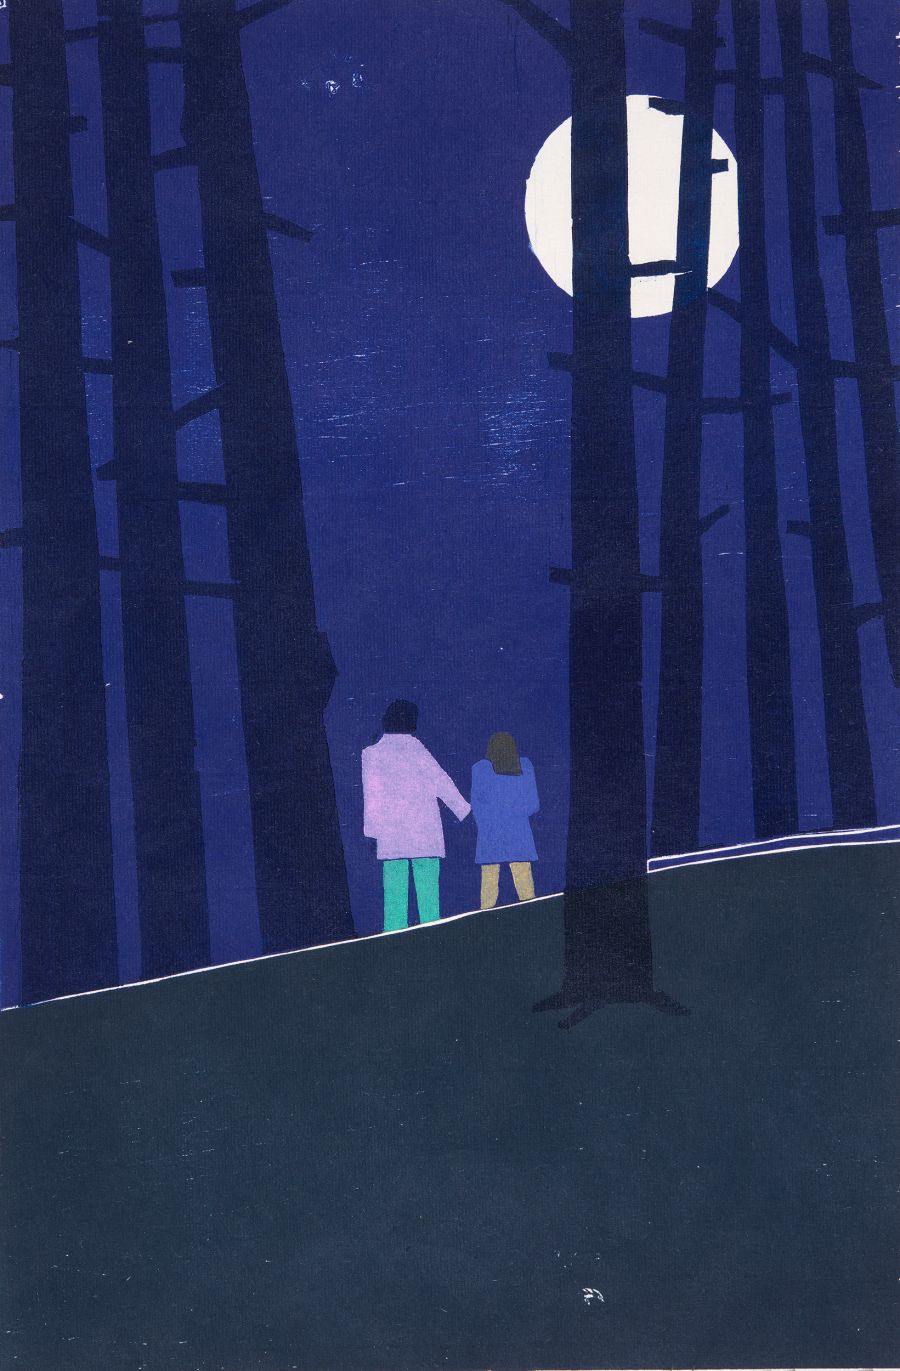 Two figures in the woods under the moon.